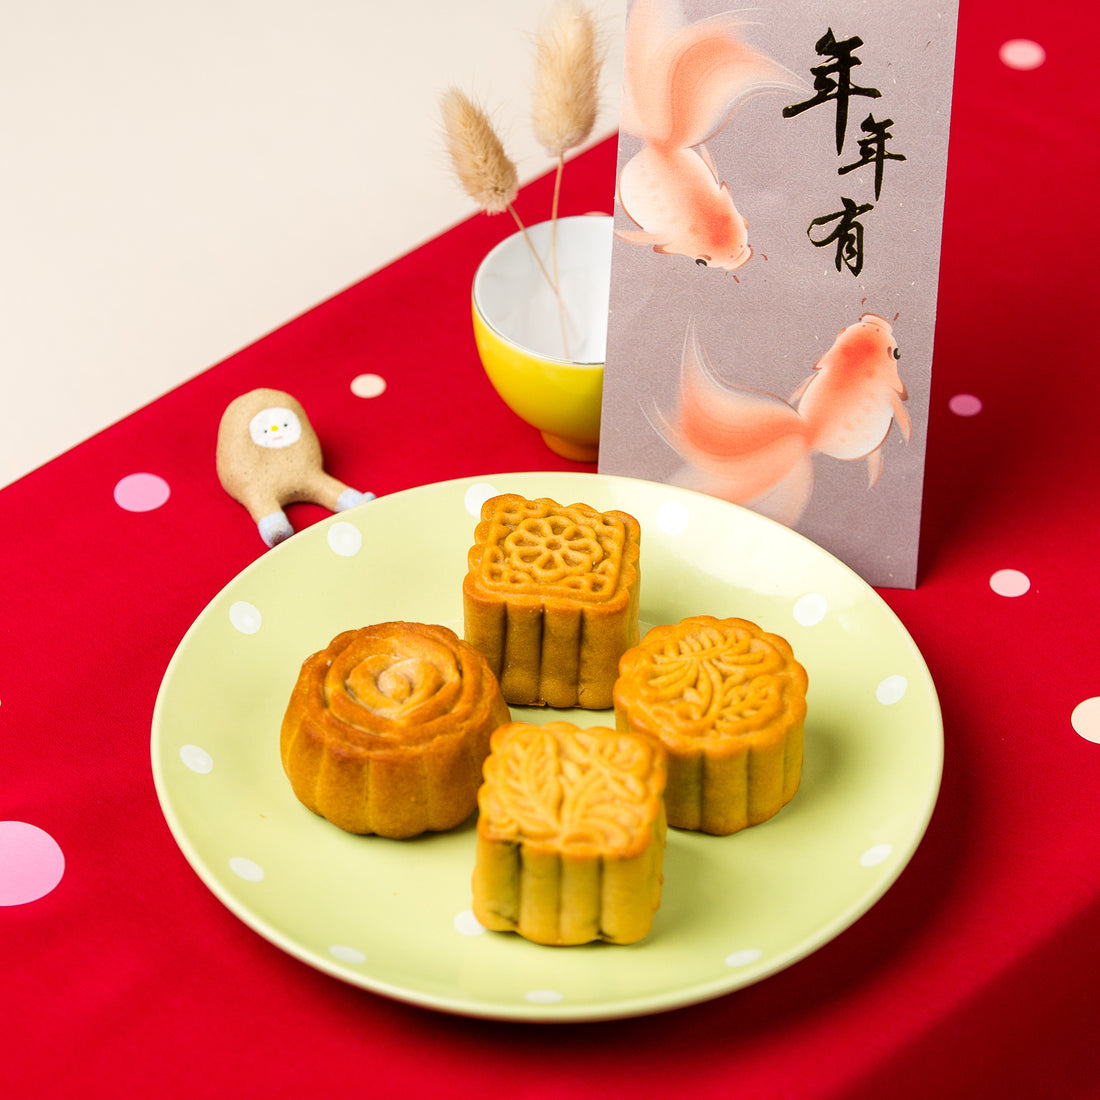 Thrillist: Where to Get Mooncakes in San Francisco